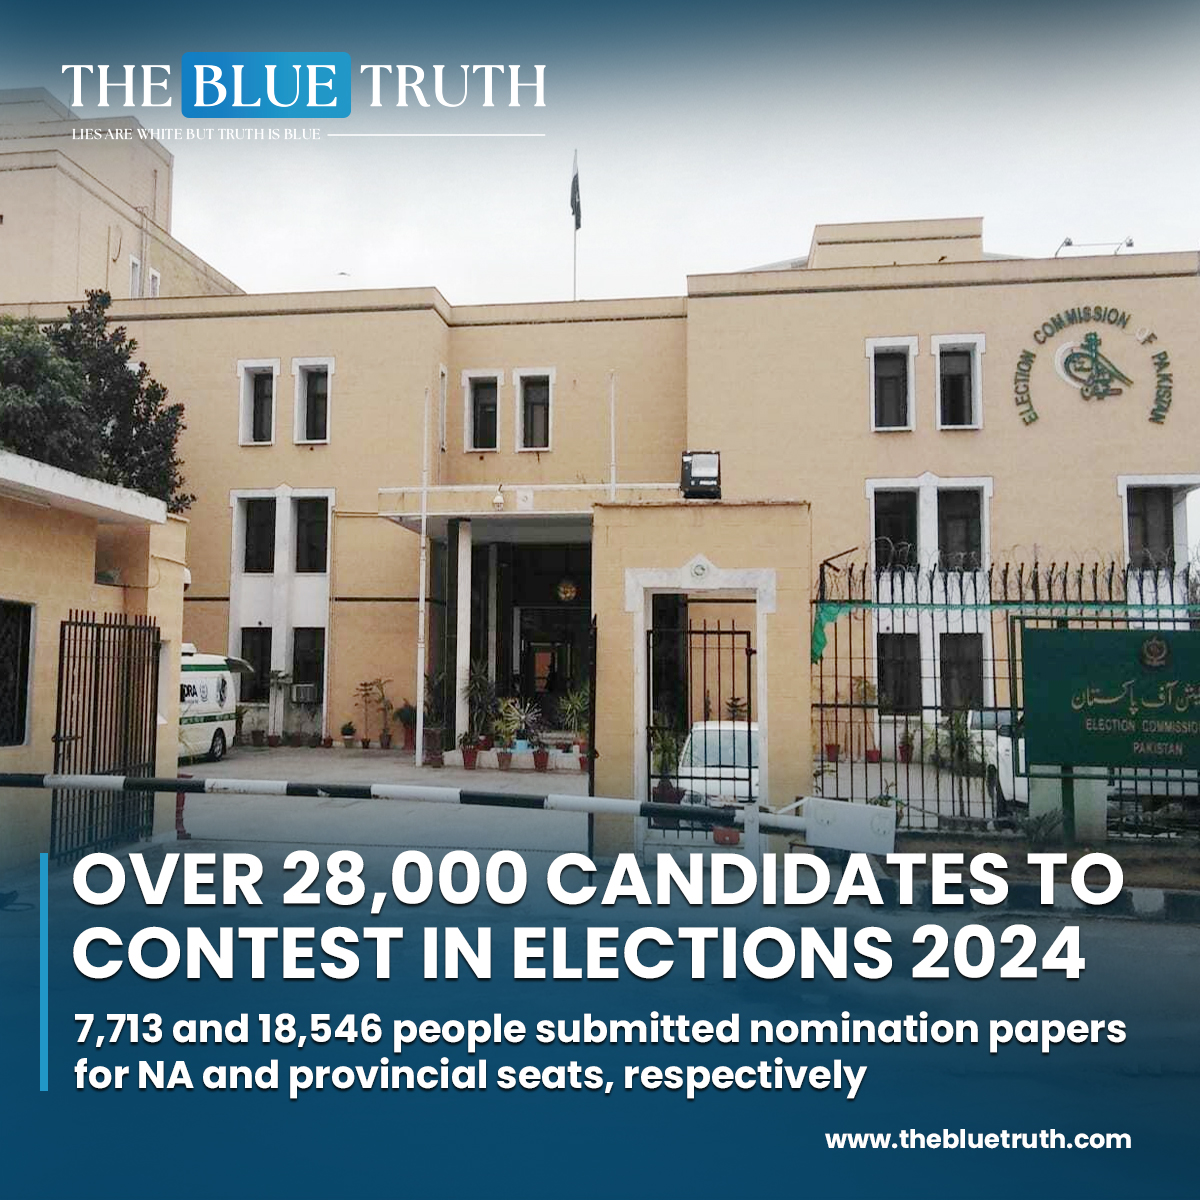 Over 28,000 candidates to contest in elections 2024.
7,713 and 18,546 people submitted nomination papers for NA and provincial seats, respectively.

#Election2024 #NominationPapers #ECP #PakistanElections #PoliticalParticipation #DemocracyInAction #tbt #TheBlueTruth